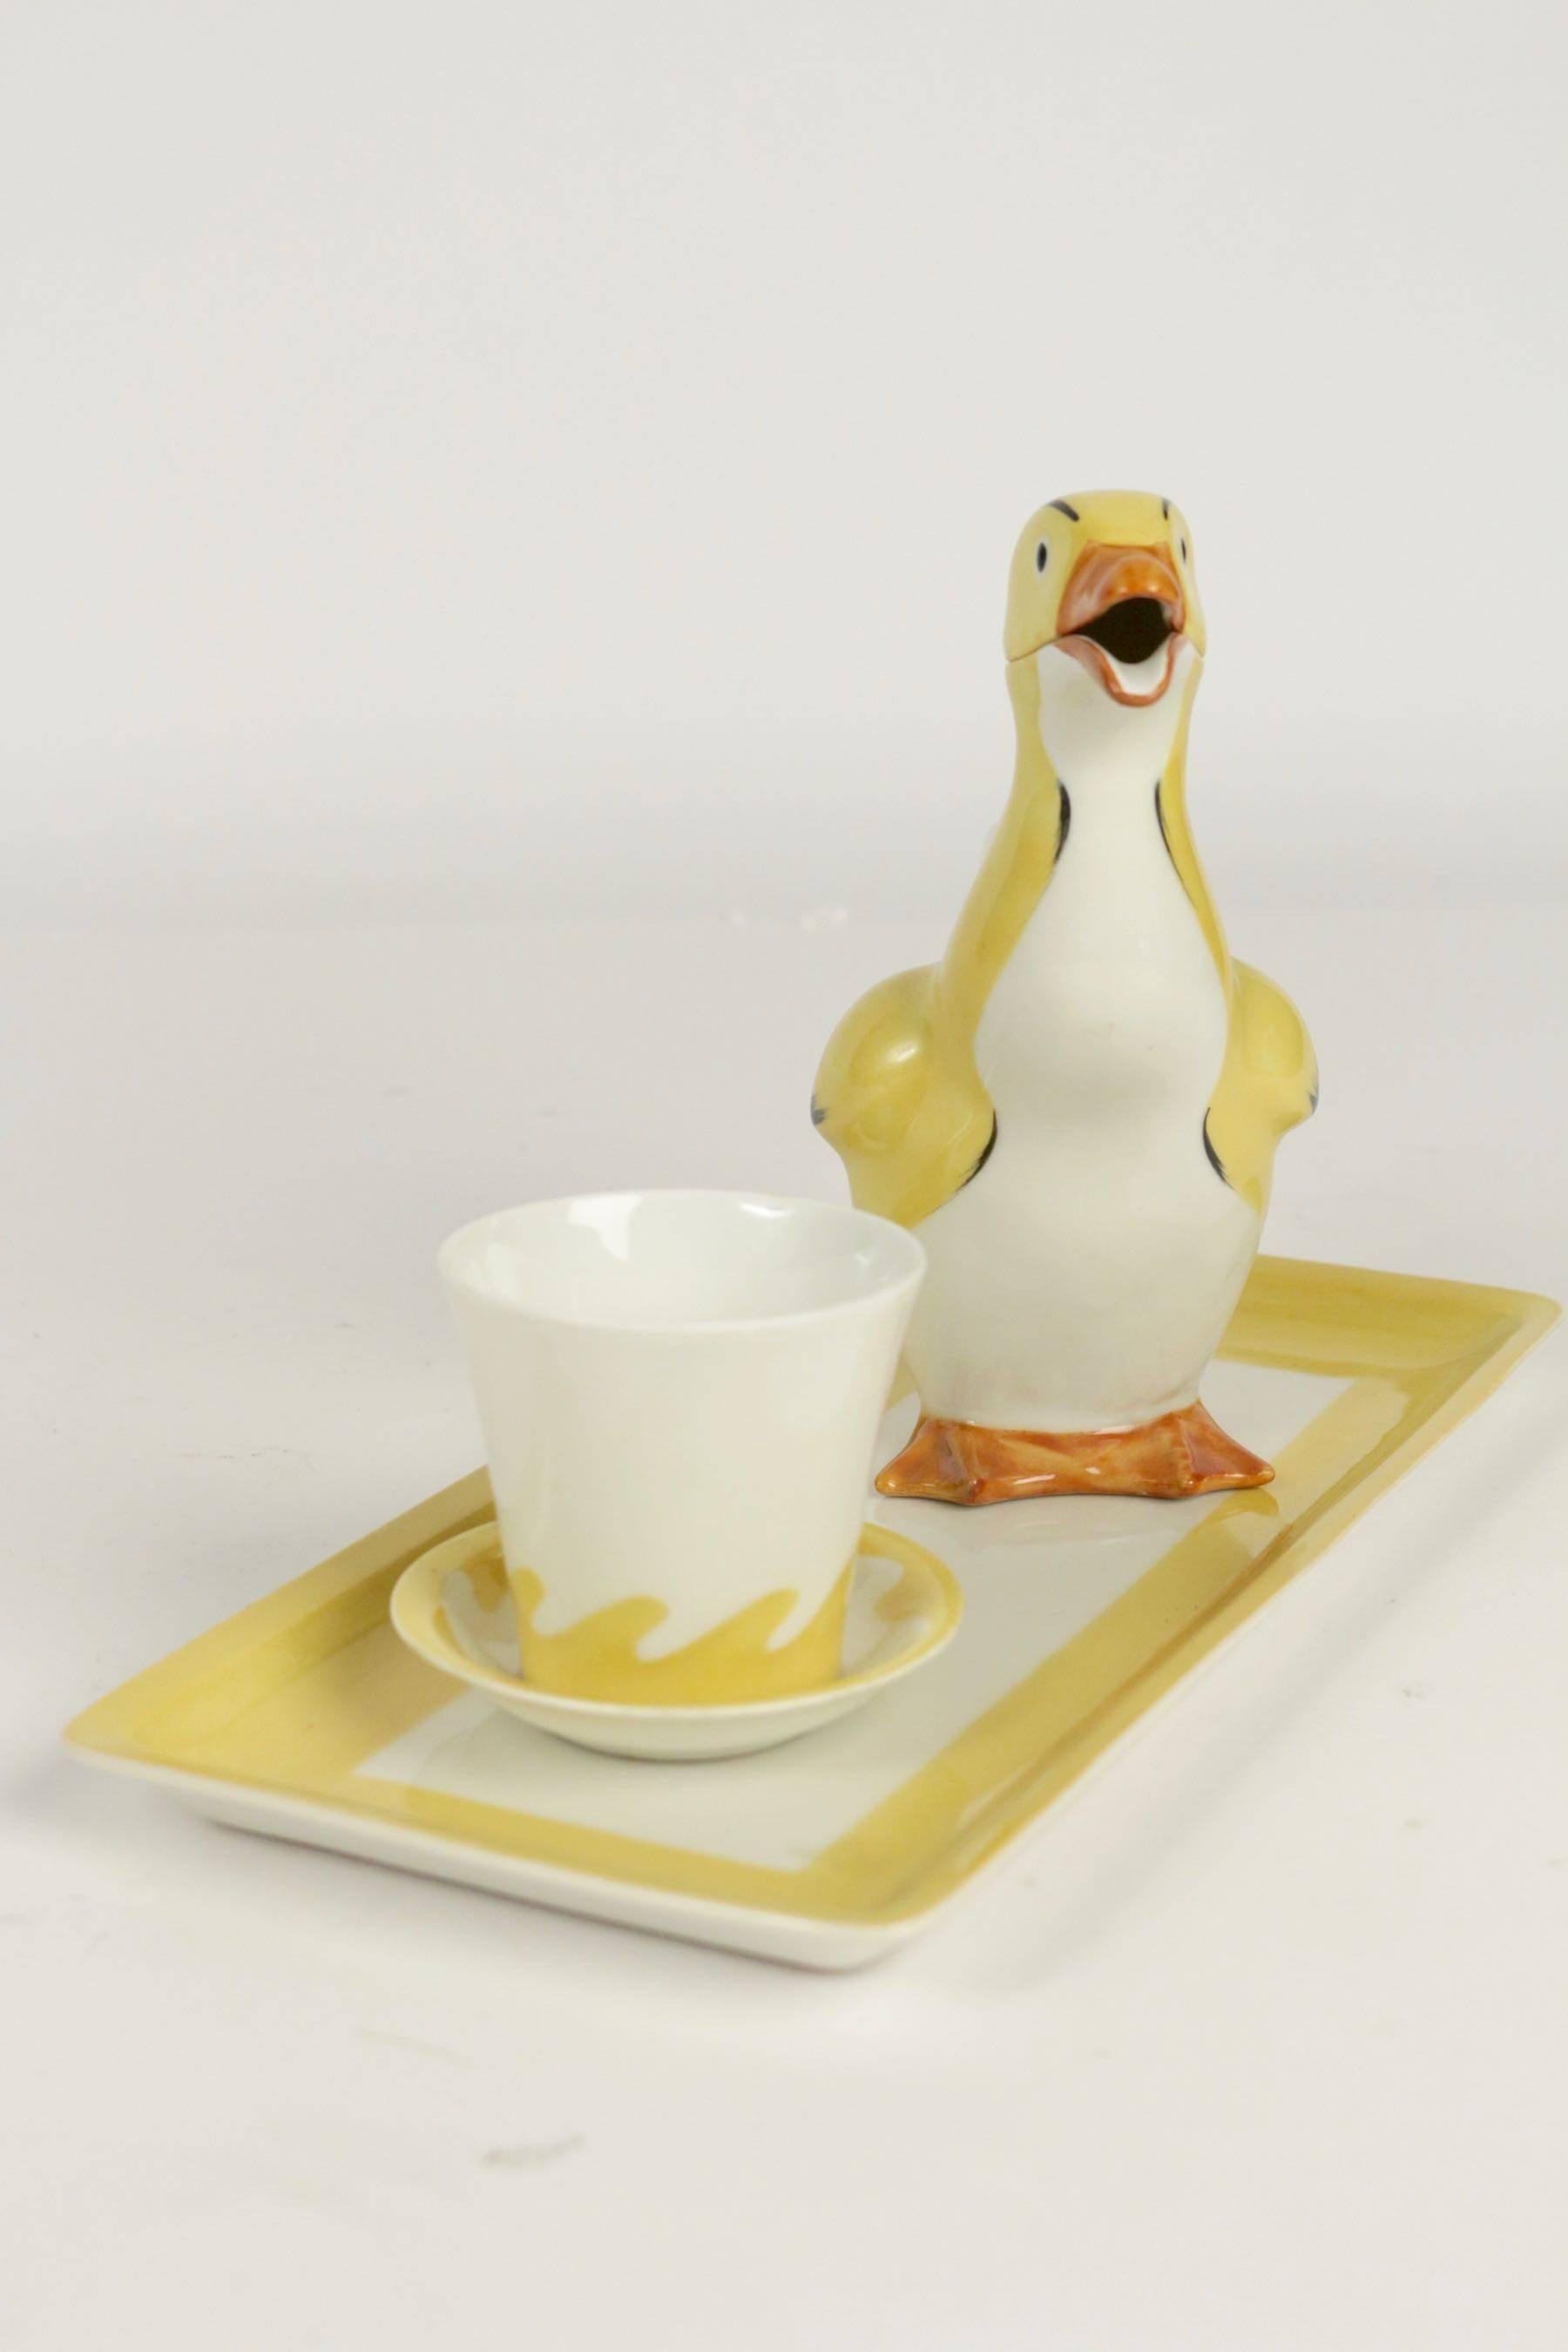 Early 20th Century Duck Service by Sandoz from the Beginning of the 20th Century